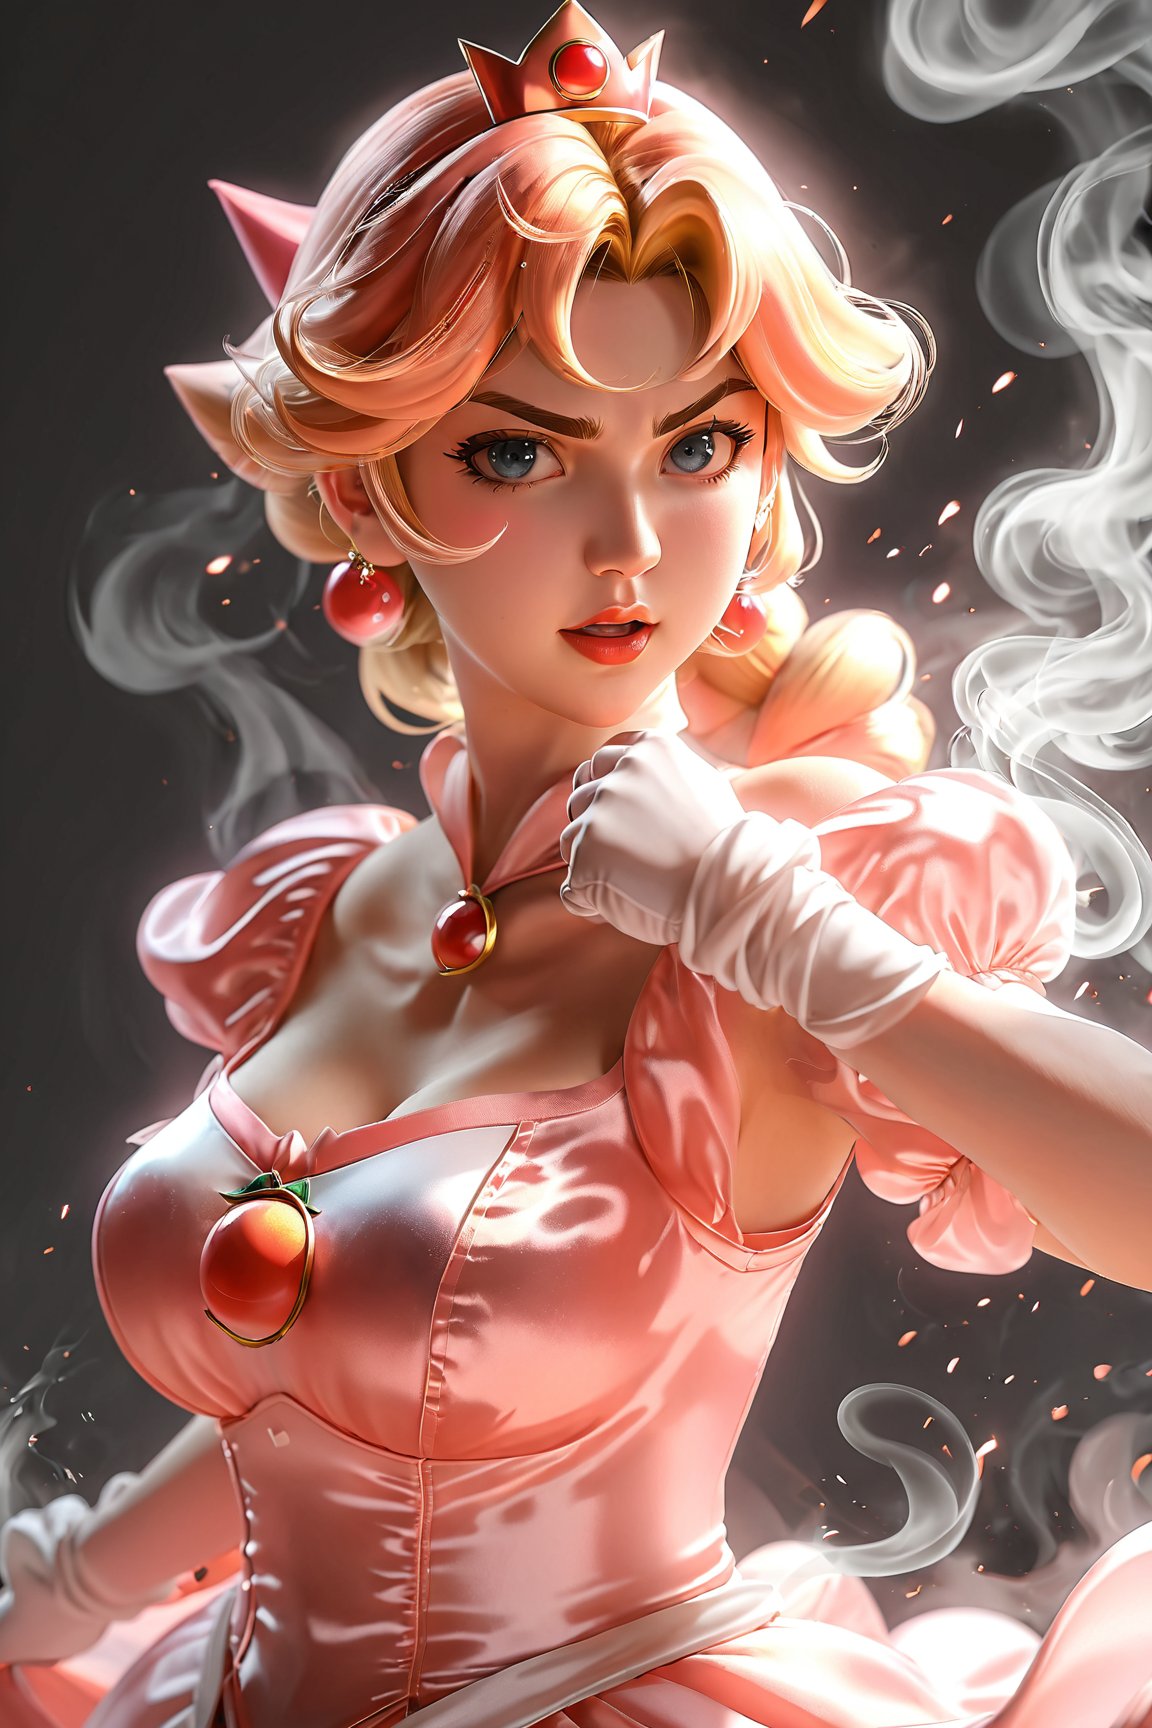 Anime style ,3d,Close Up Portrait, Simple color Palette, Hd, very Detailed, awesome Quality, reflecting, luminescent, translucent, Ethereal, Aura, princess Peach, angry Peach_SMP, light pink revealing clothes, White smoke, light beams through smoke, Bruce Lees iconic posing fighting frame, fists up, underboob senketsu2,